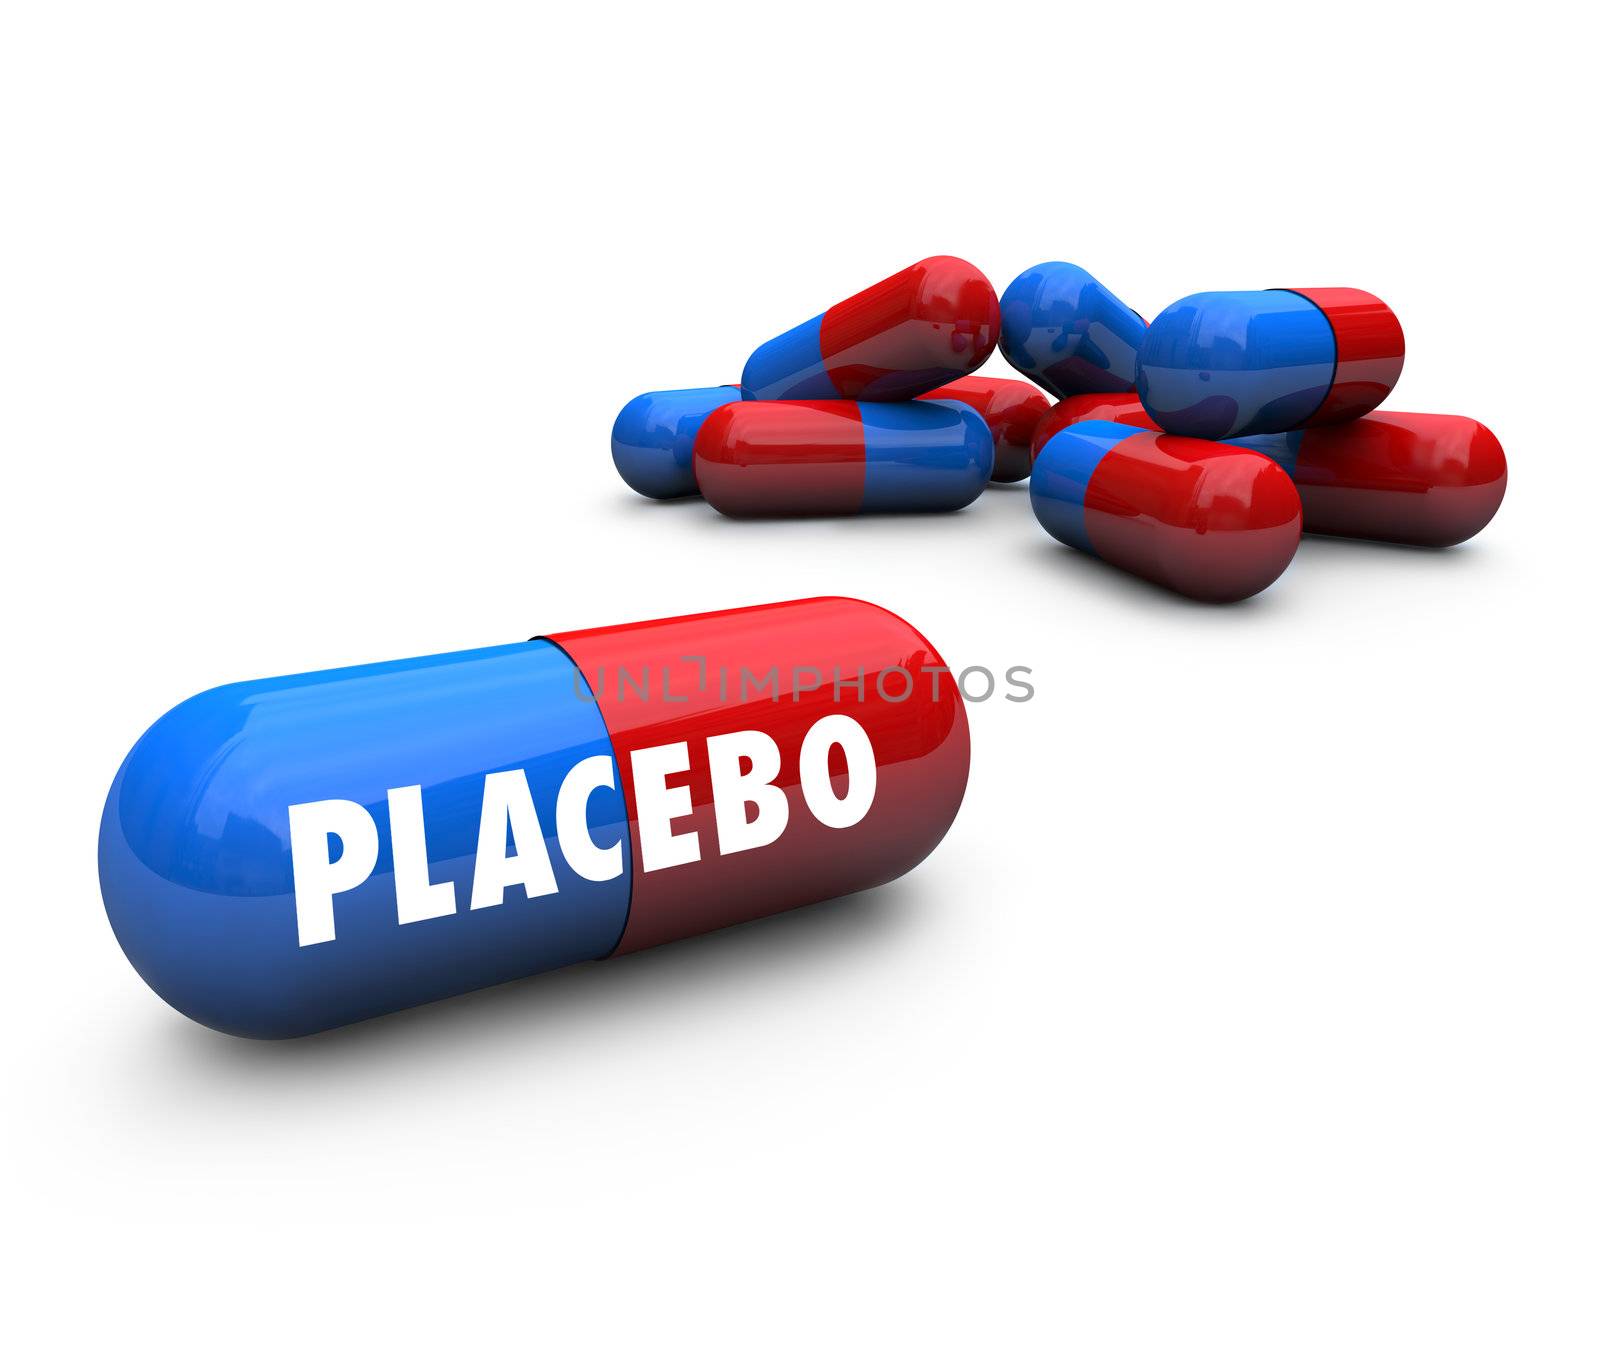 Placebo - Pill with No Medicinal Effects in Control Group of Stu by iQoncept